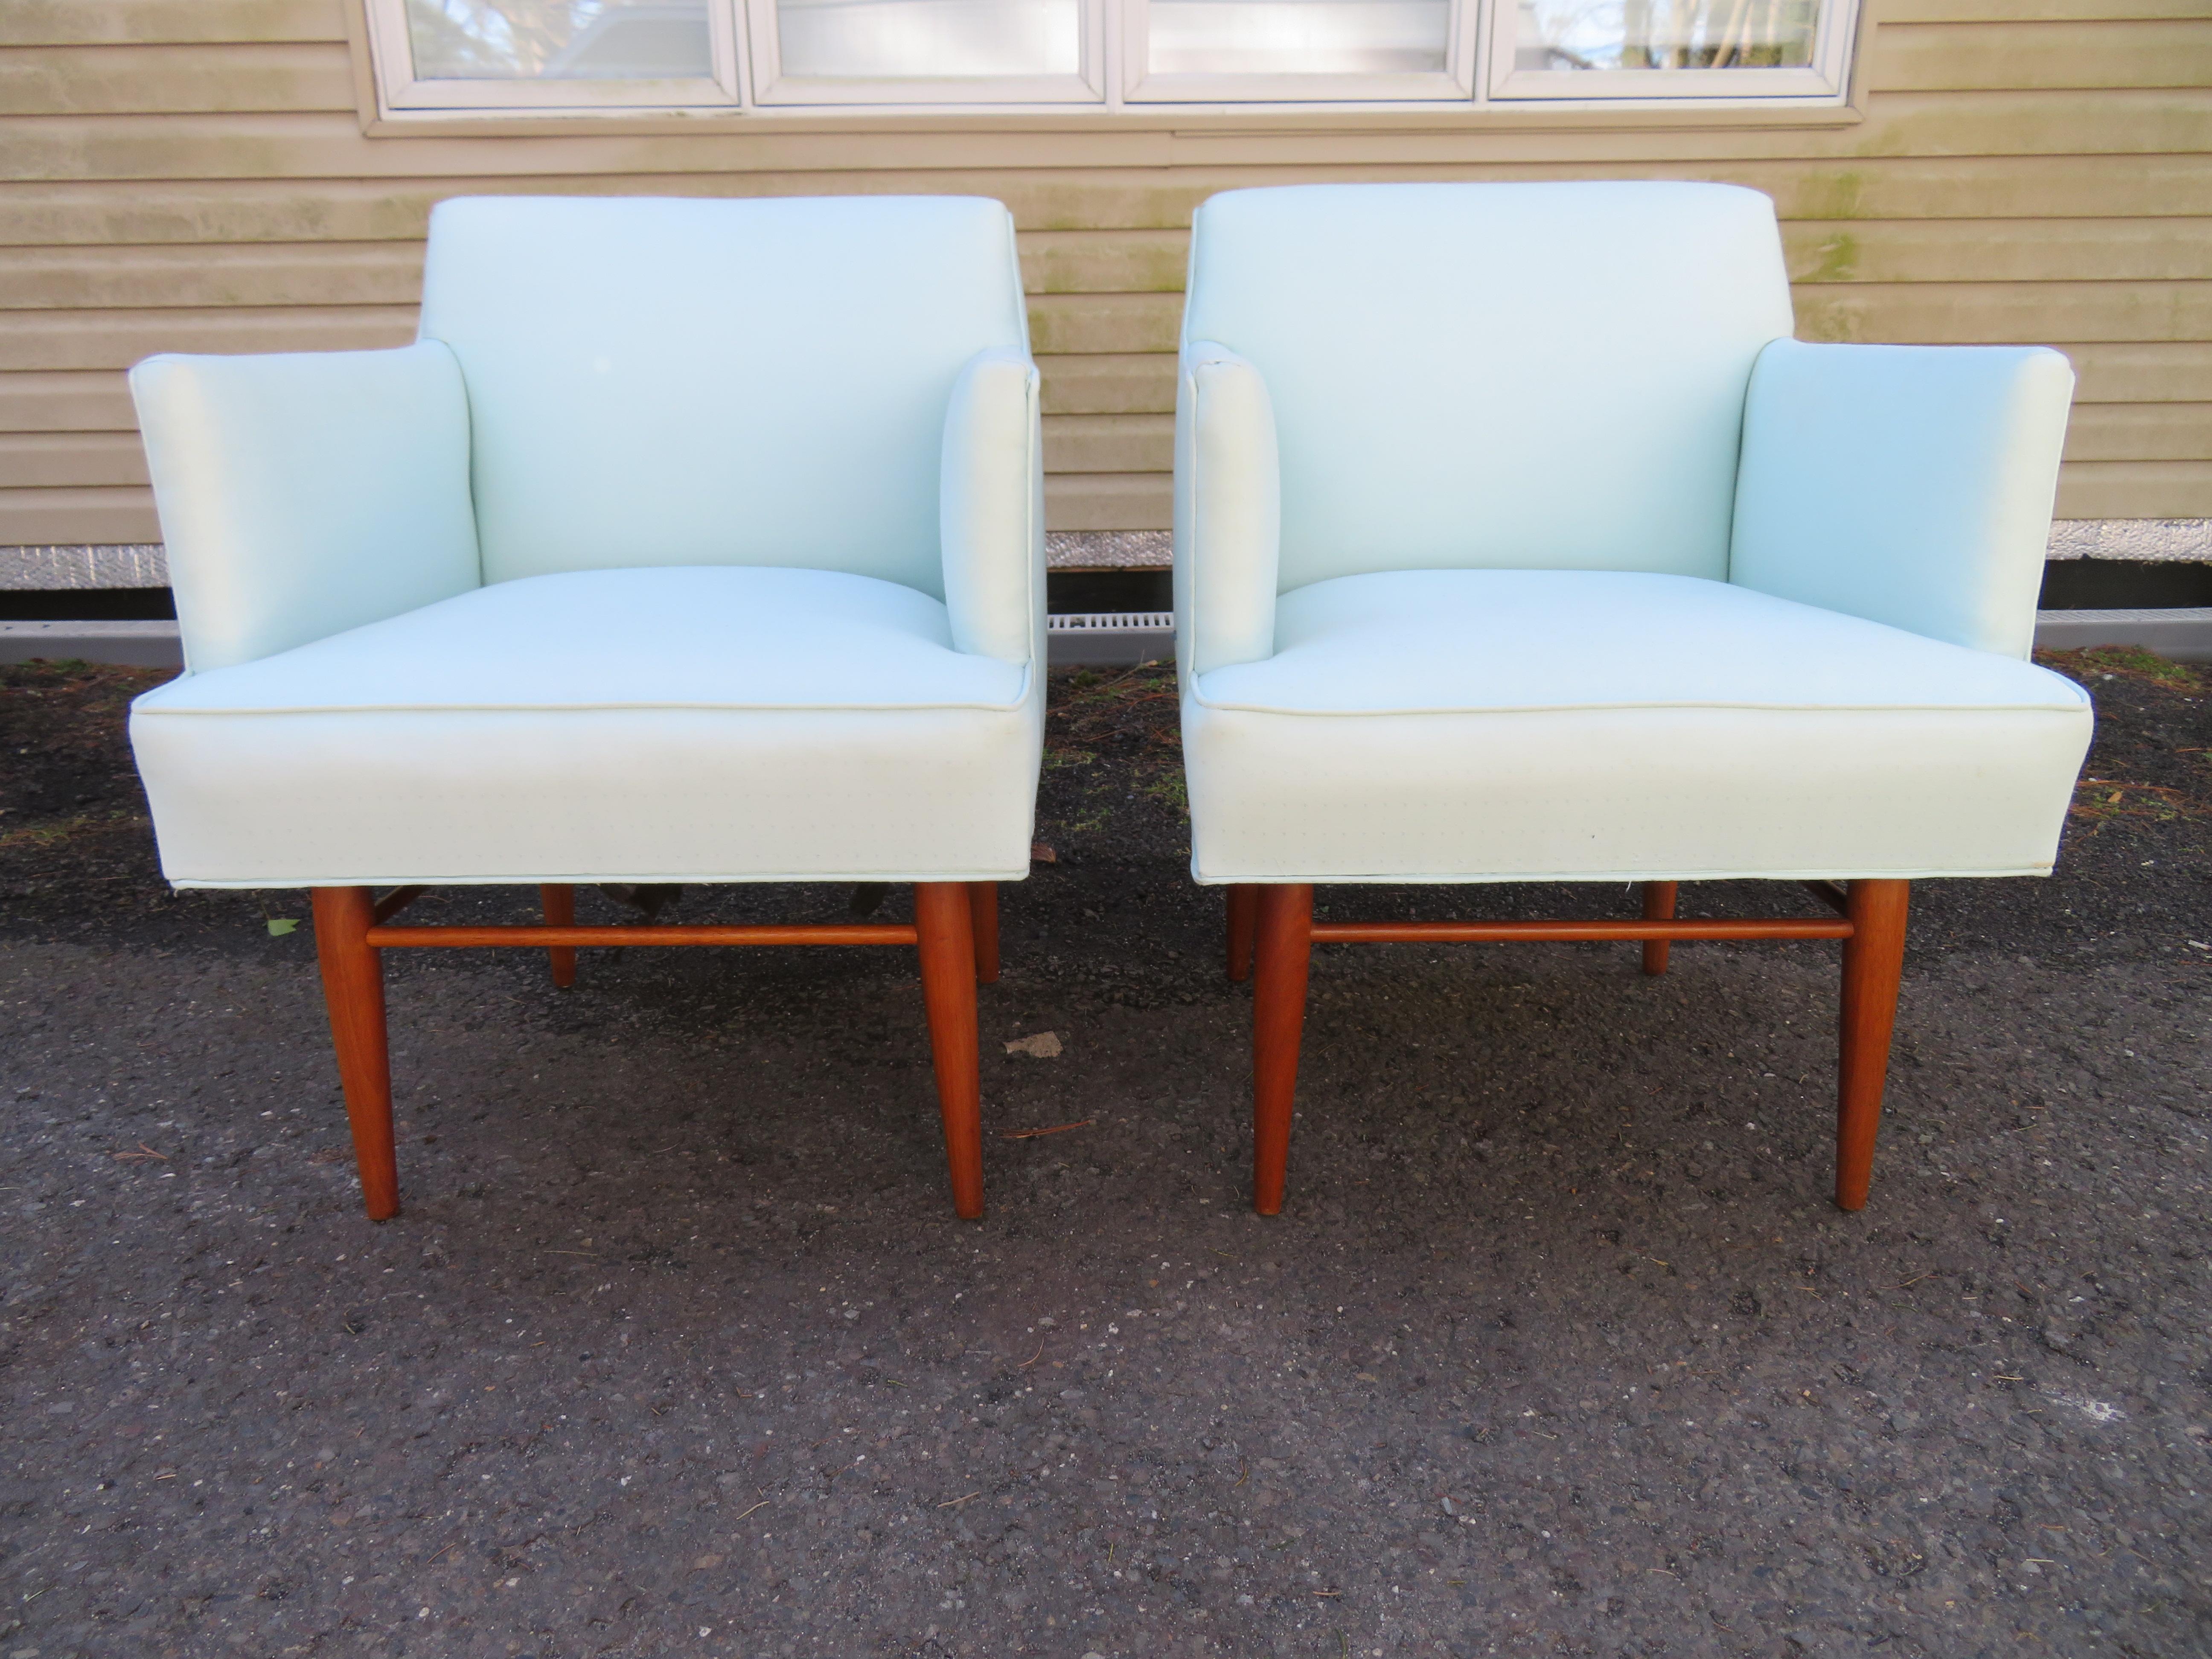 Rare pair of Milo Baughman for Arch Gordon walnut armchairs. We just love the superb quality and handsome styling of these classics designed by our favorite midcentury designer Mr. Baughman. They measure: 30